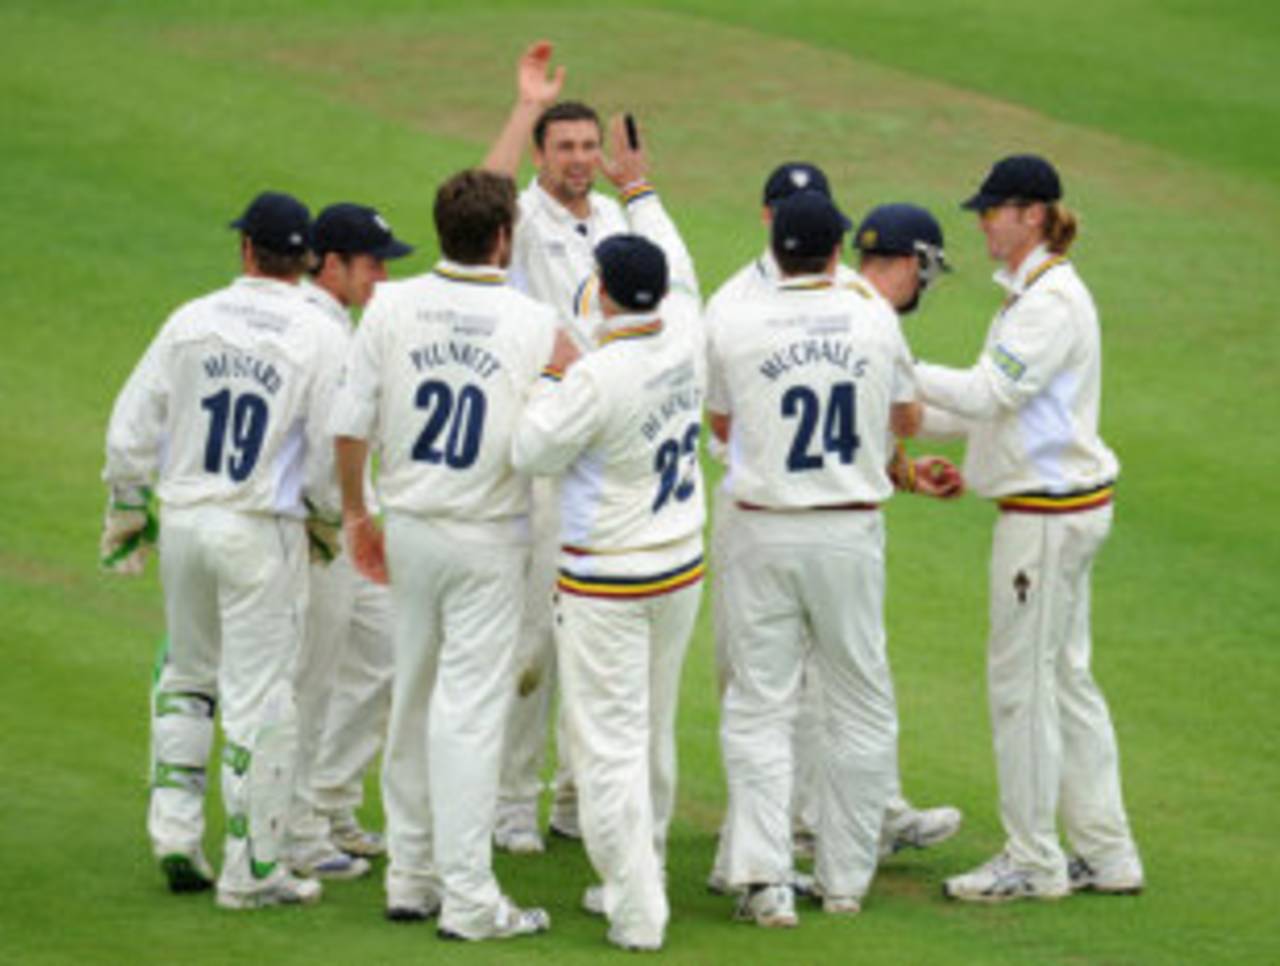 Steve Harmison is congratulated by his team-mates, Durham v Nottinghamshire, County Championship, 17 July 2009